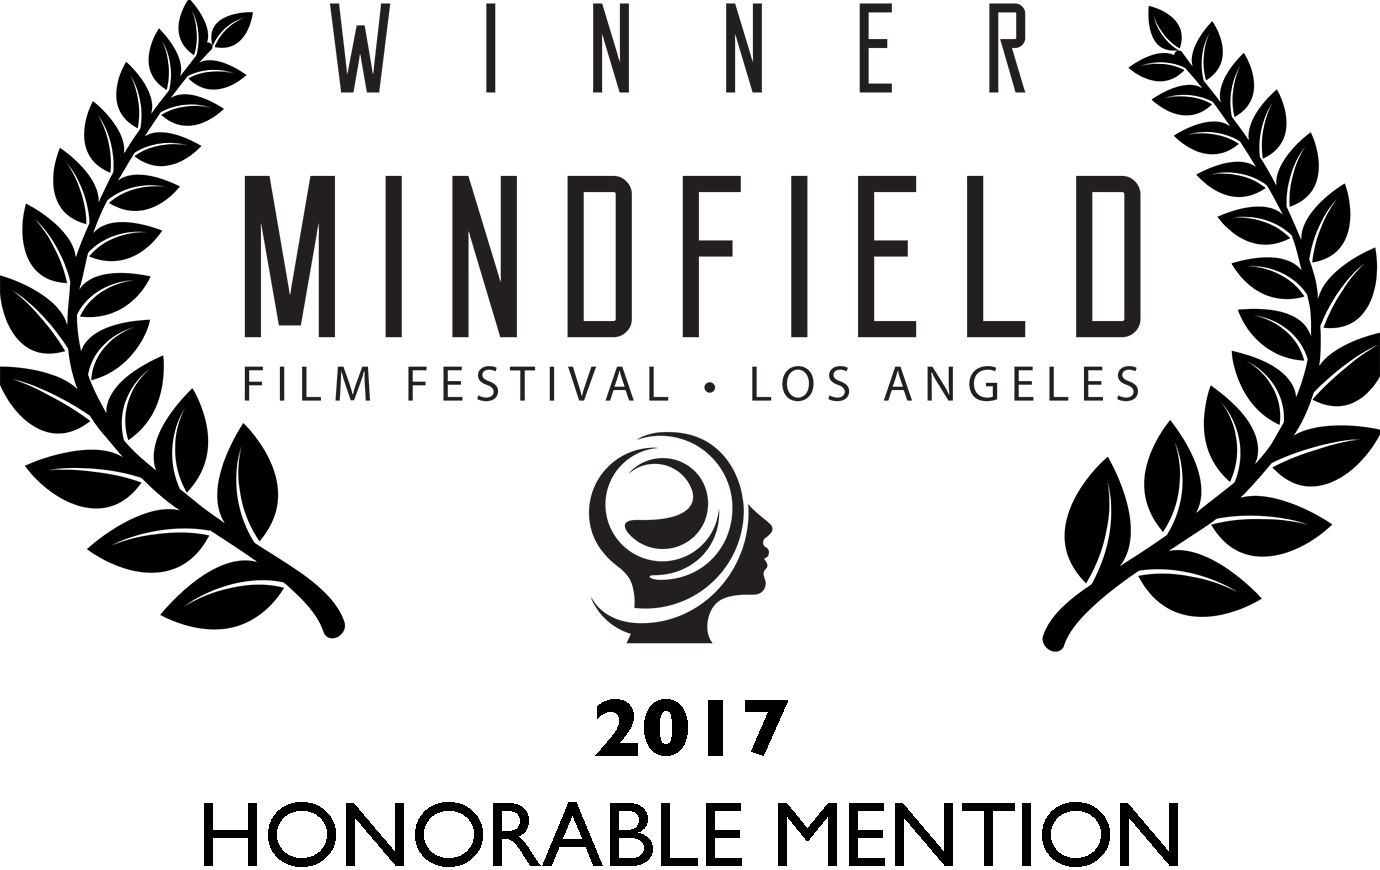 Sofia Wellman - Whats Love Got To Do With It - Film by Sofia Wellman - Mindfield Film Festival - Los Angeles - Honorable Mention - 2017